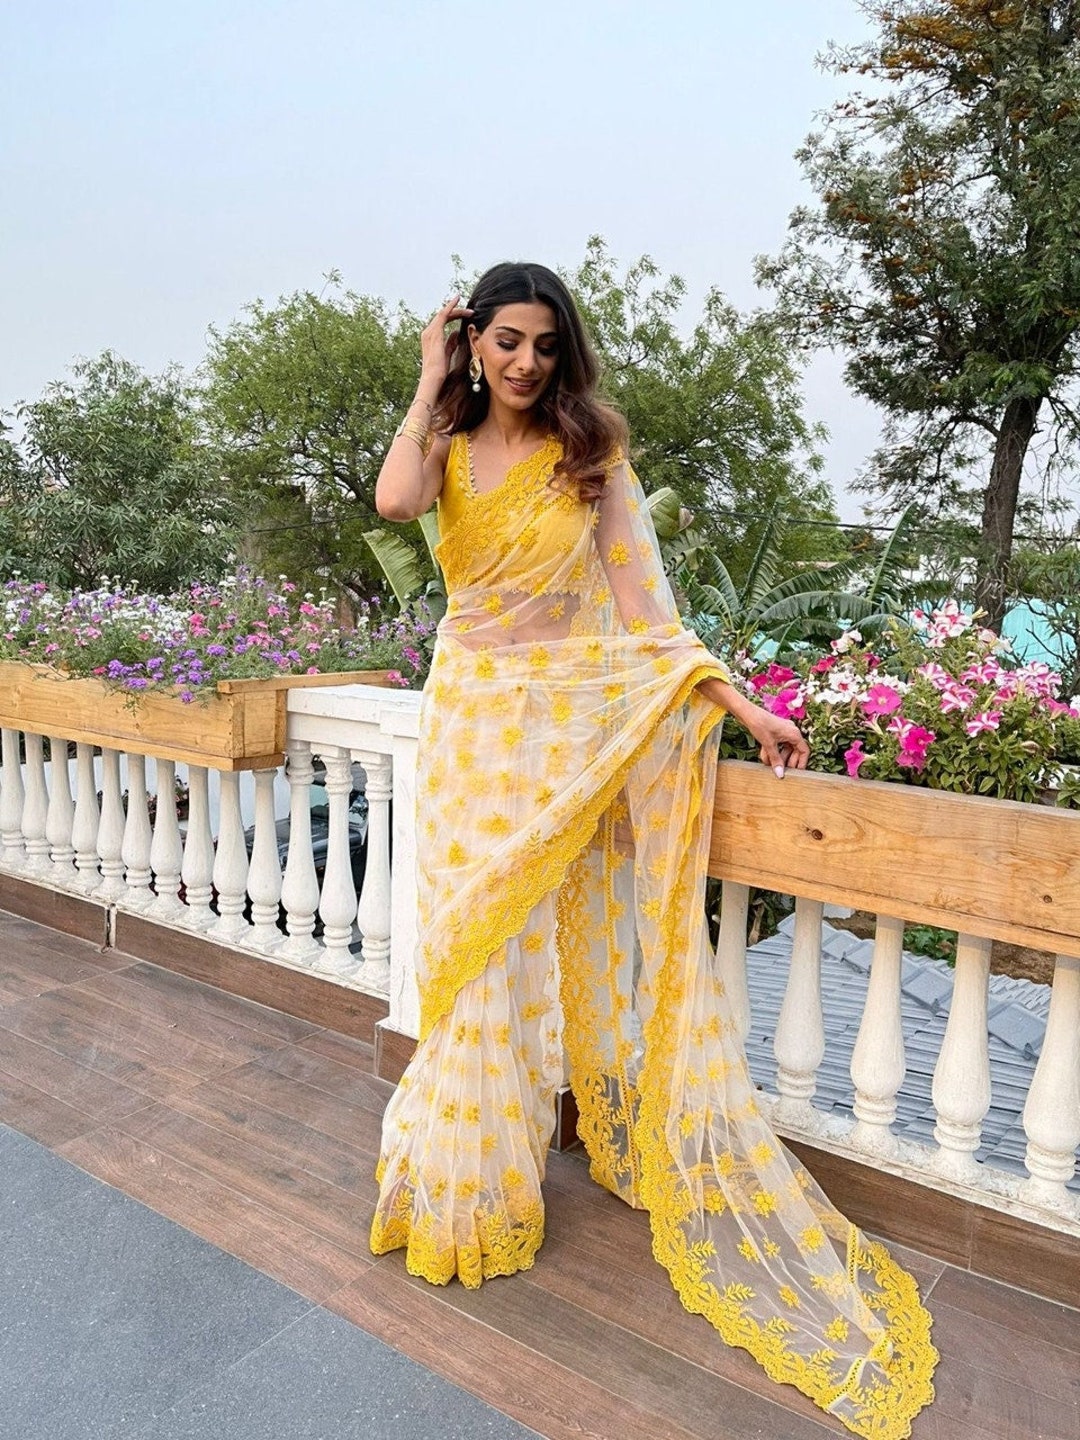 Designer Butterfly Net Yellow Saree for Haldi Function, Wedding Saree With  Embroidery Thread Work, Bollywood Saree With Lace Border Work -  Canada